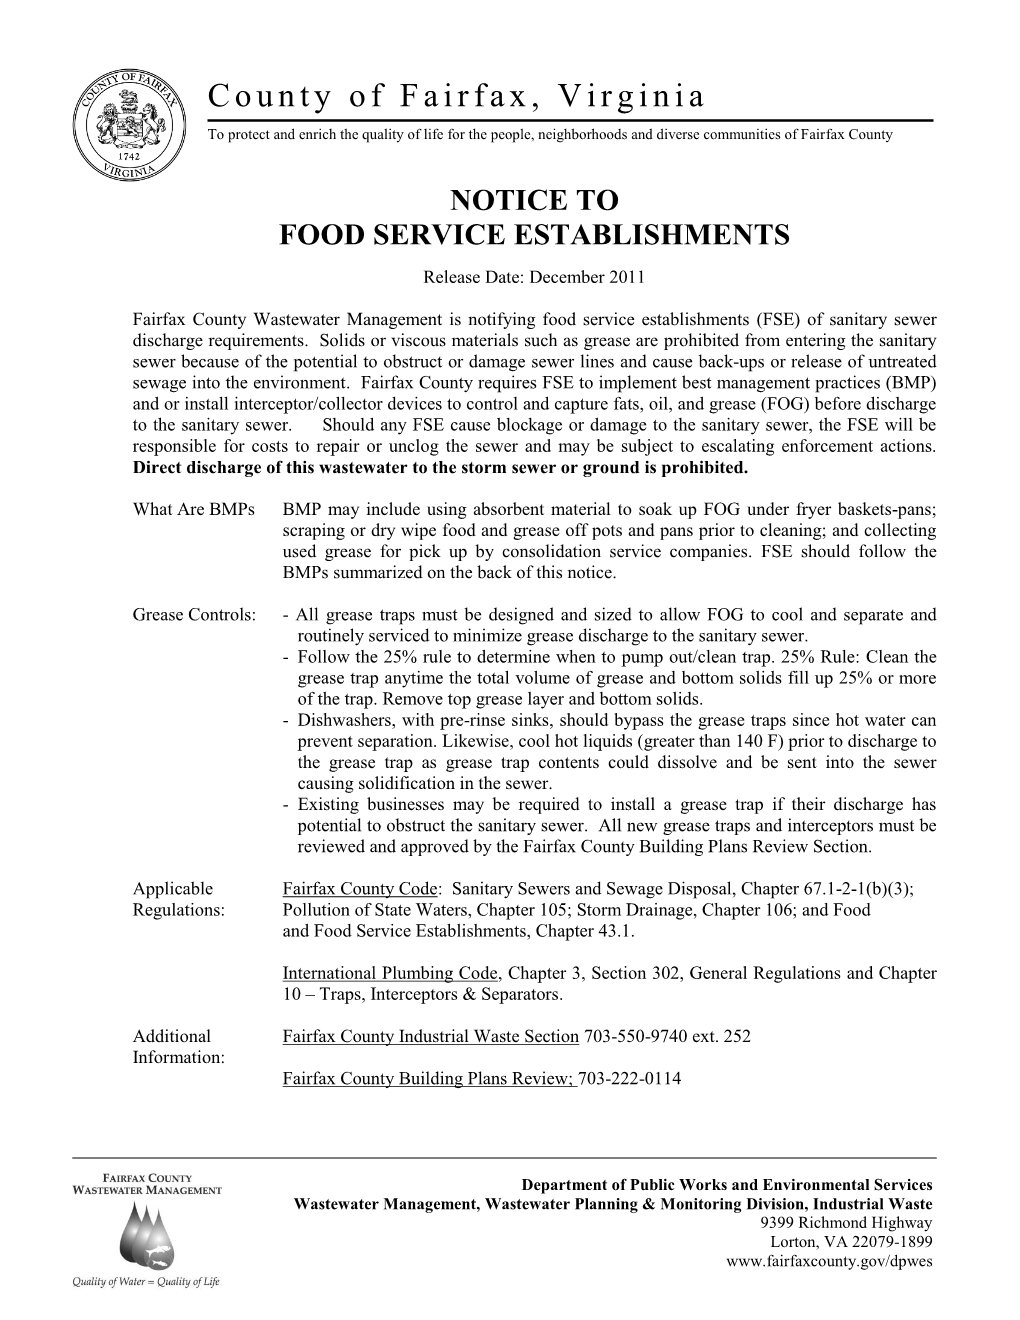 Notice to Food Establishments About